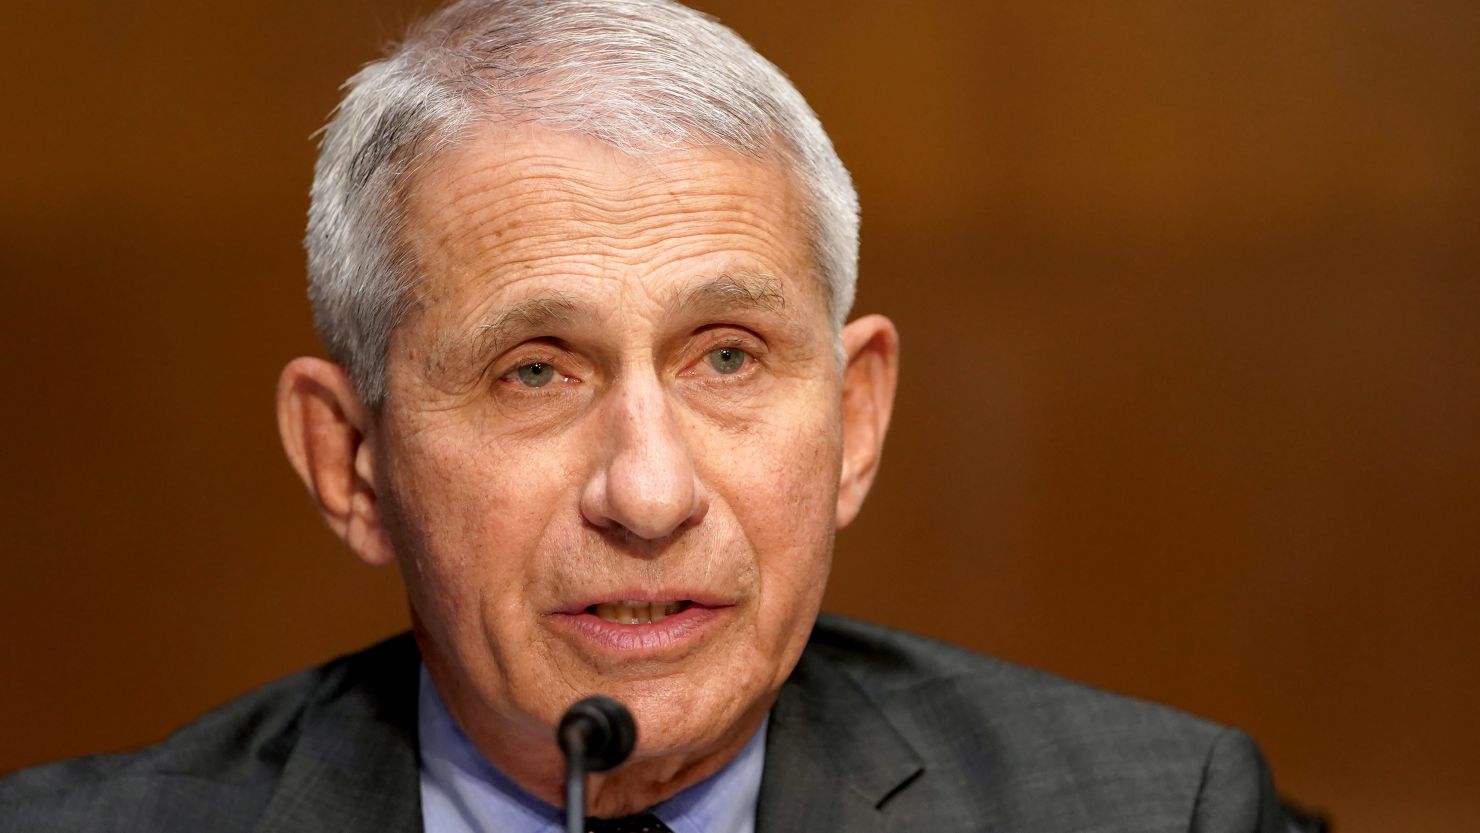 Dr. Anthony Fauci gives an opening statement at a Senate Health, Education, Labor and Pensions Committee hearing to discuss the ongoing federal response to Covid-19 on May 11, 2021, in Washington, DC.